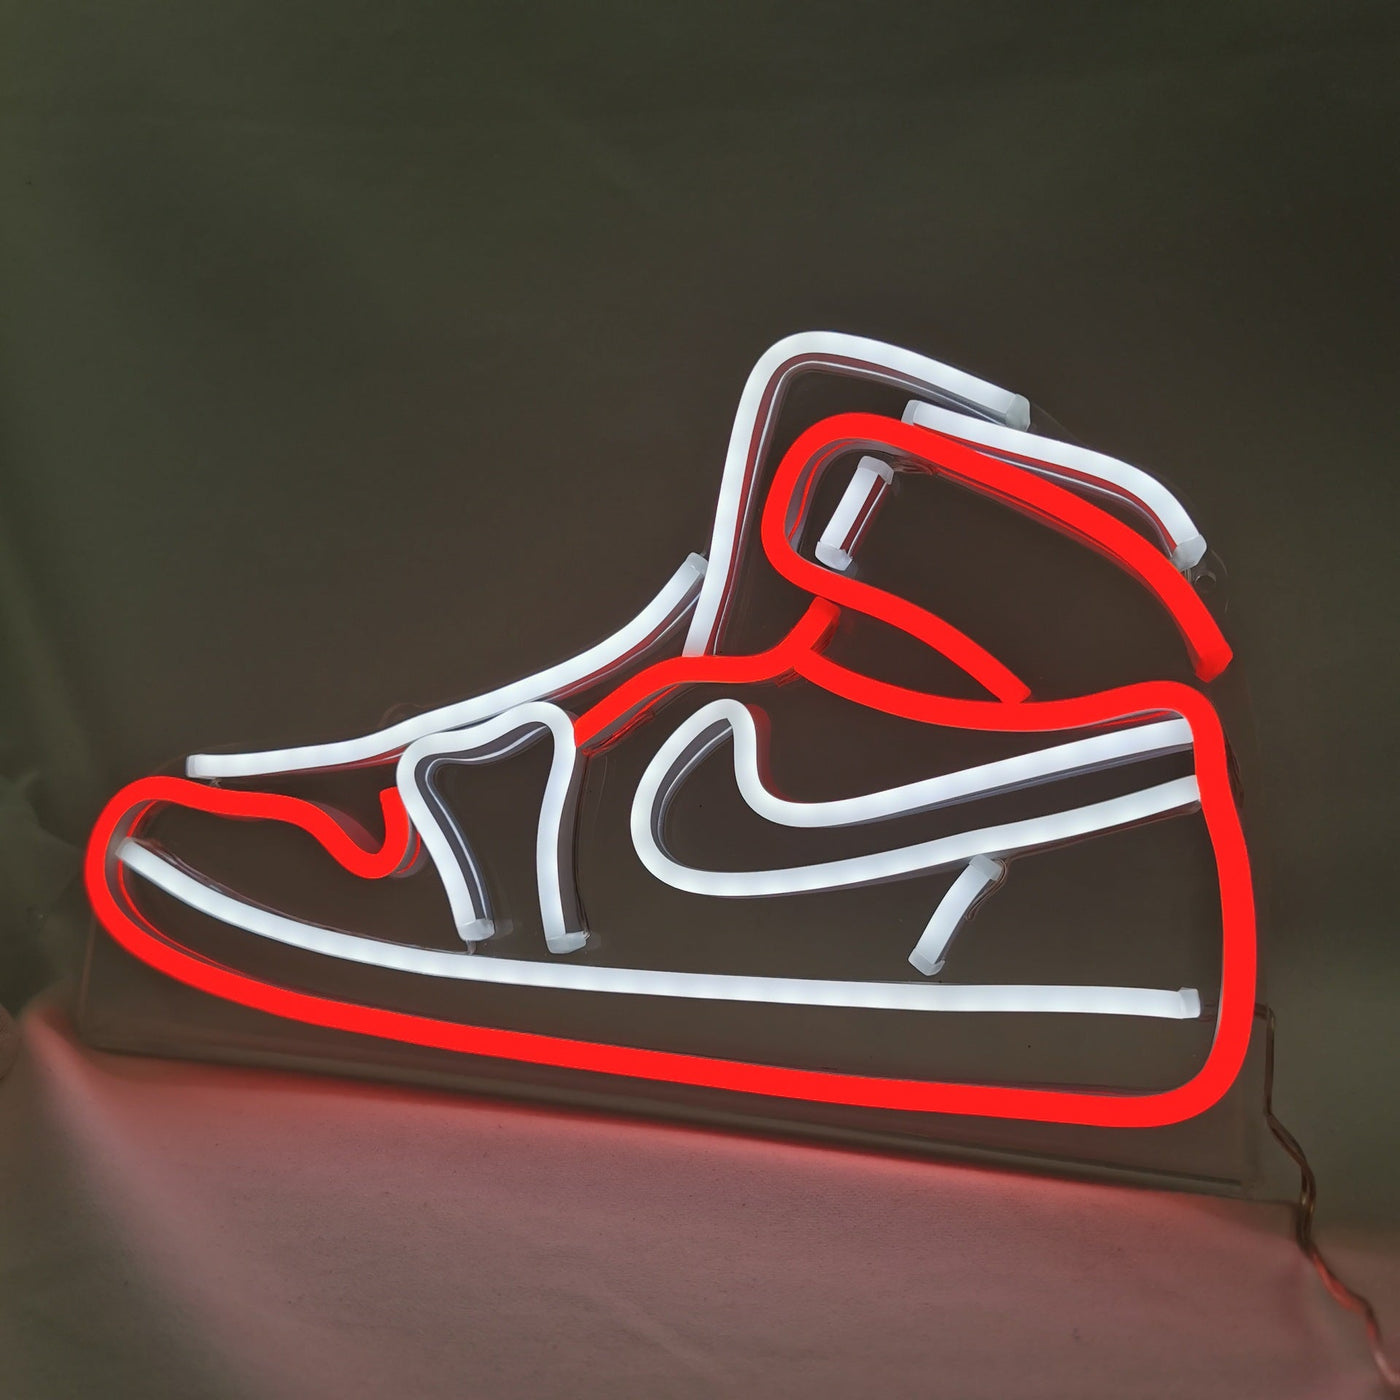 Fashion Shoes Neon Signs Led Neon Lighting